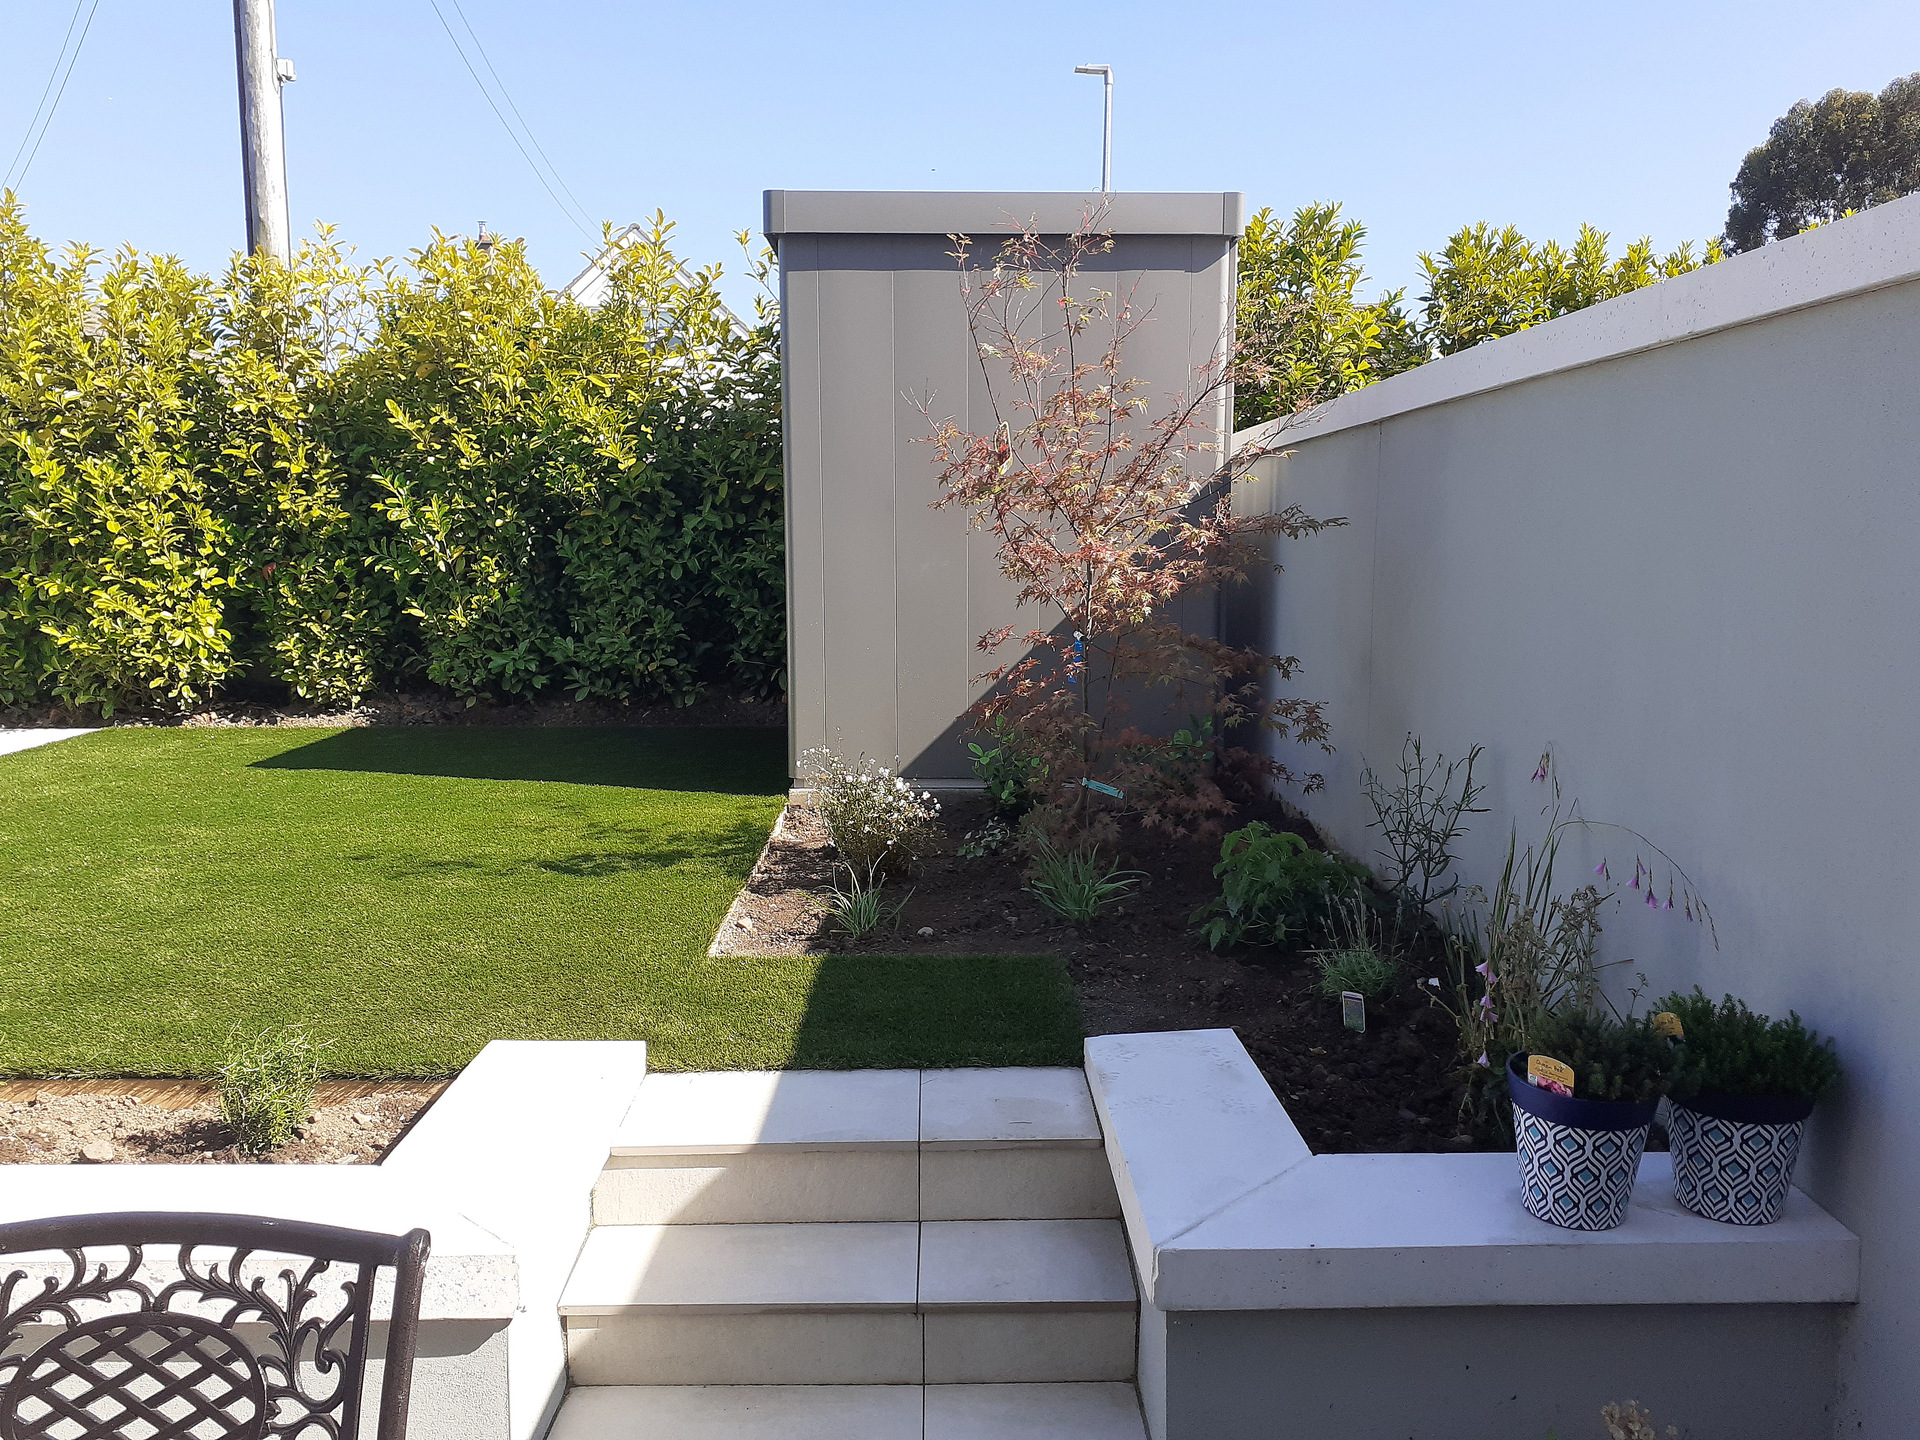 Biohort Neo Garden Shed, Size 1B in metallic quartz grey - supplied + fitted in Killiney, Co Dublin by Owen Chubb Landscapers, Ireland's Premier Biohort Supplier and Trained & Certified Installation Partner.